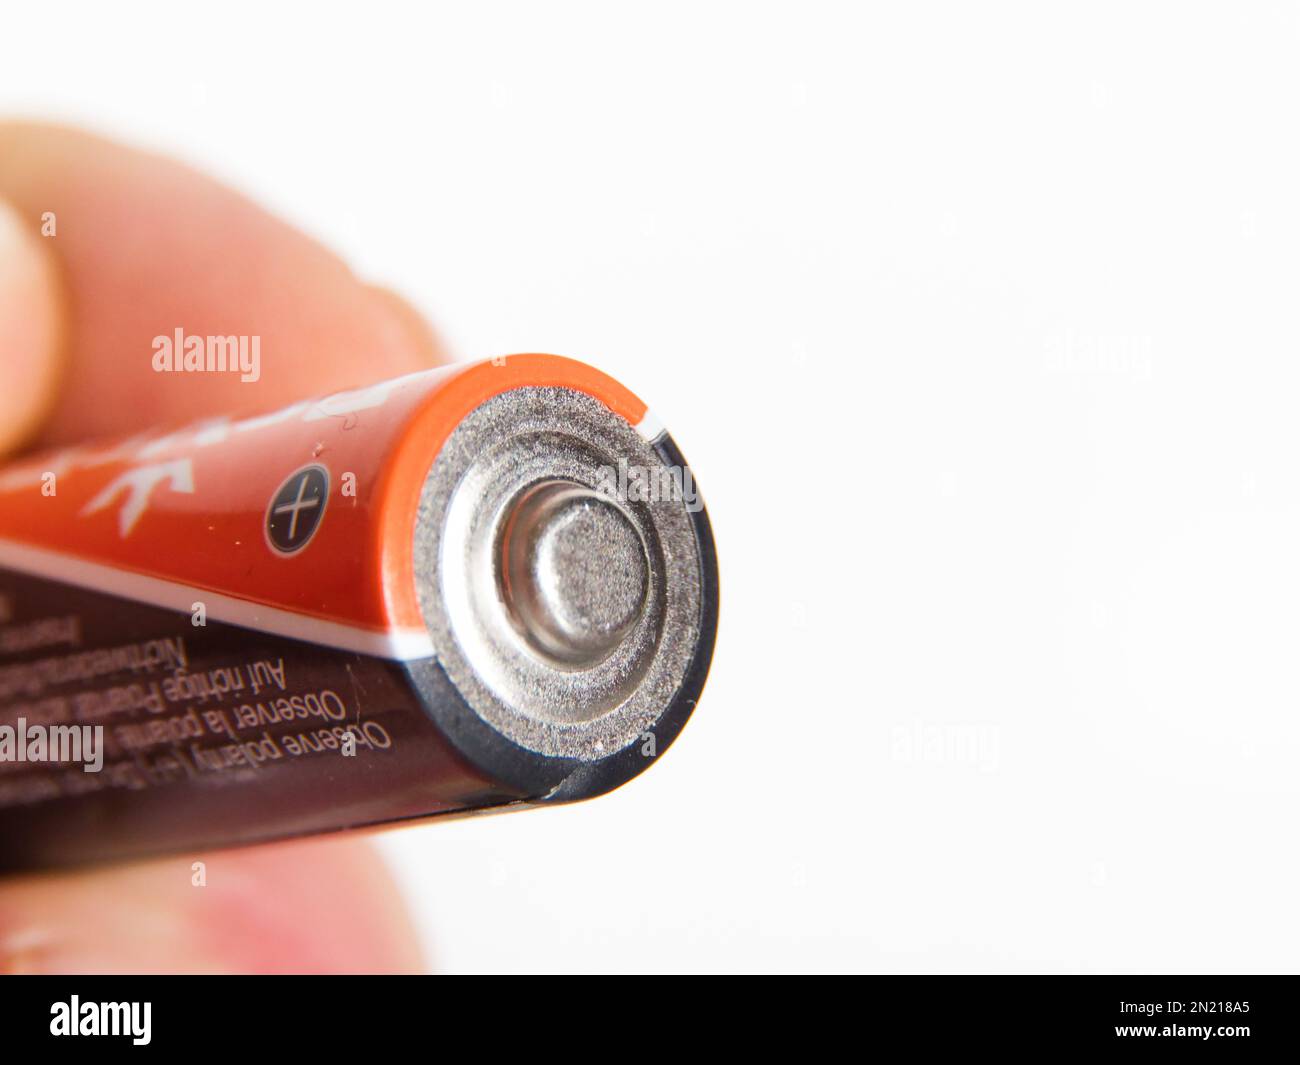 orange battery in hand. on a white background, close-up Stock Photo